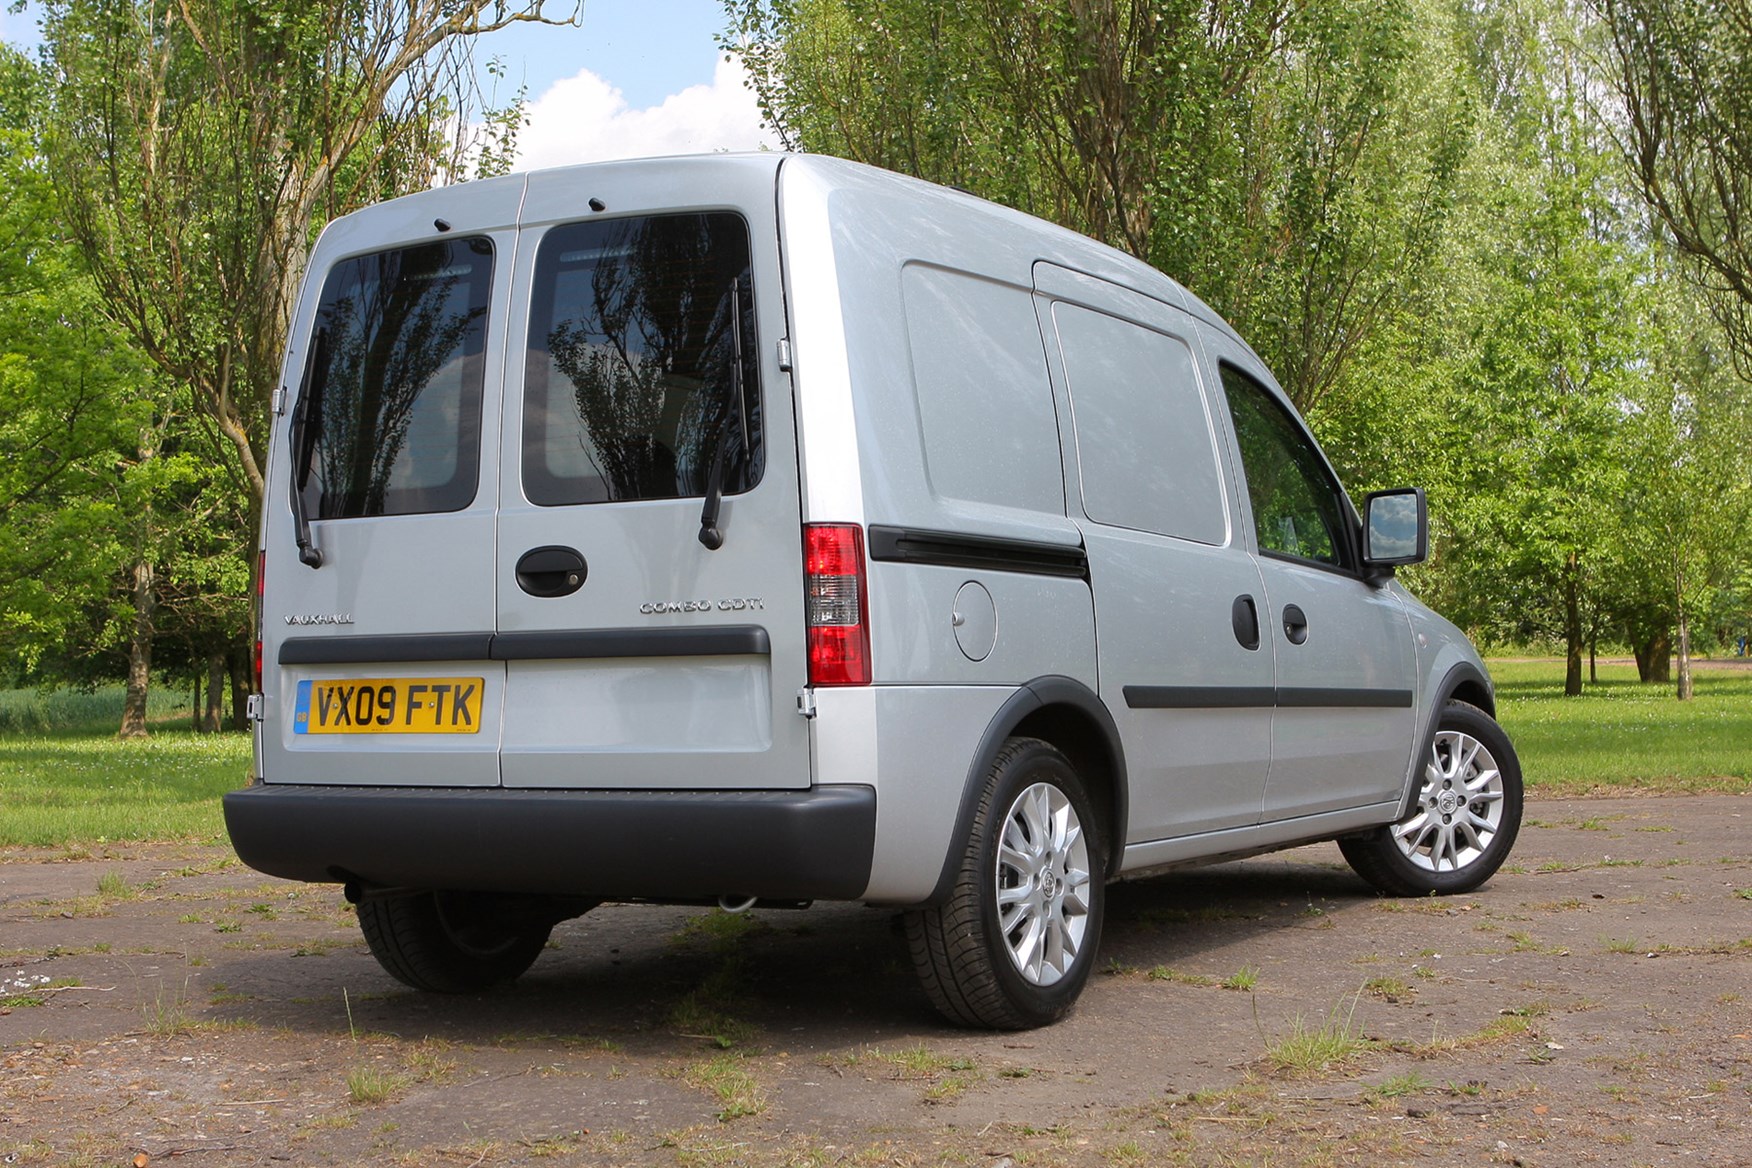 Vauxhall Combo review on Parkers Vans - rear